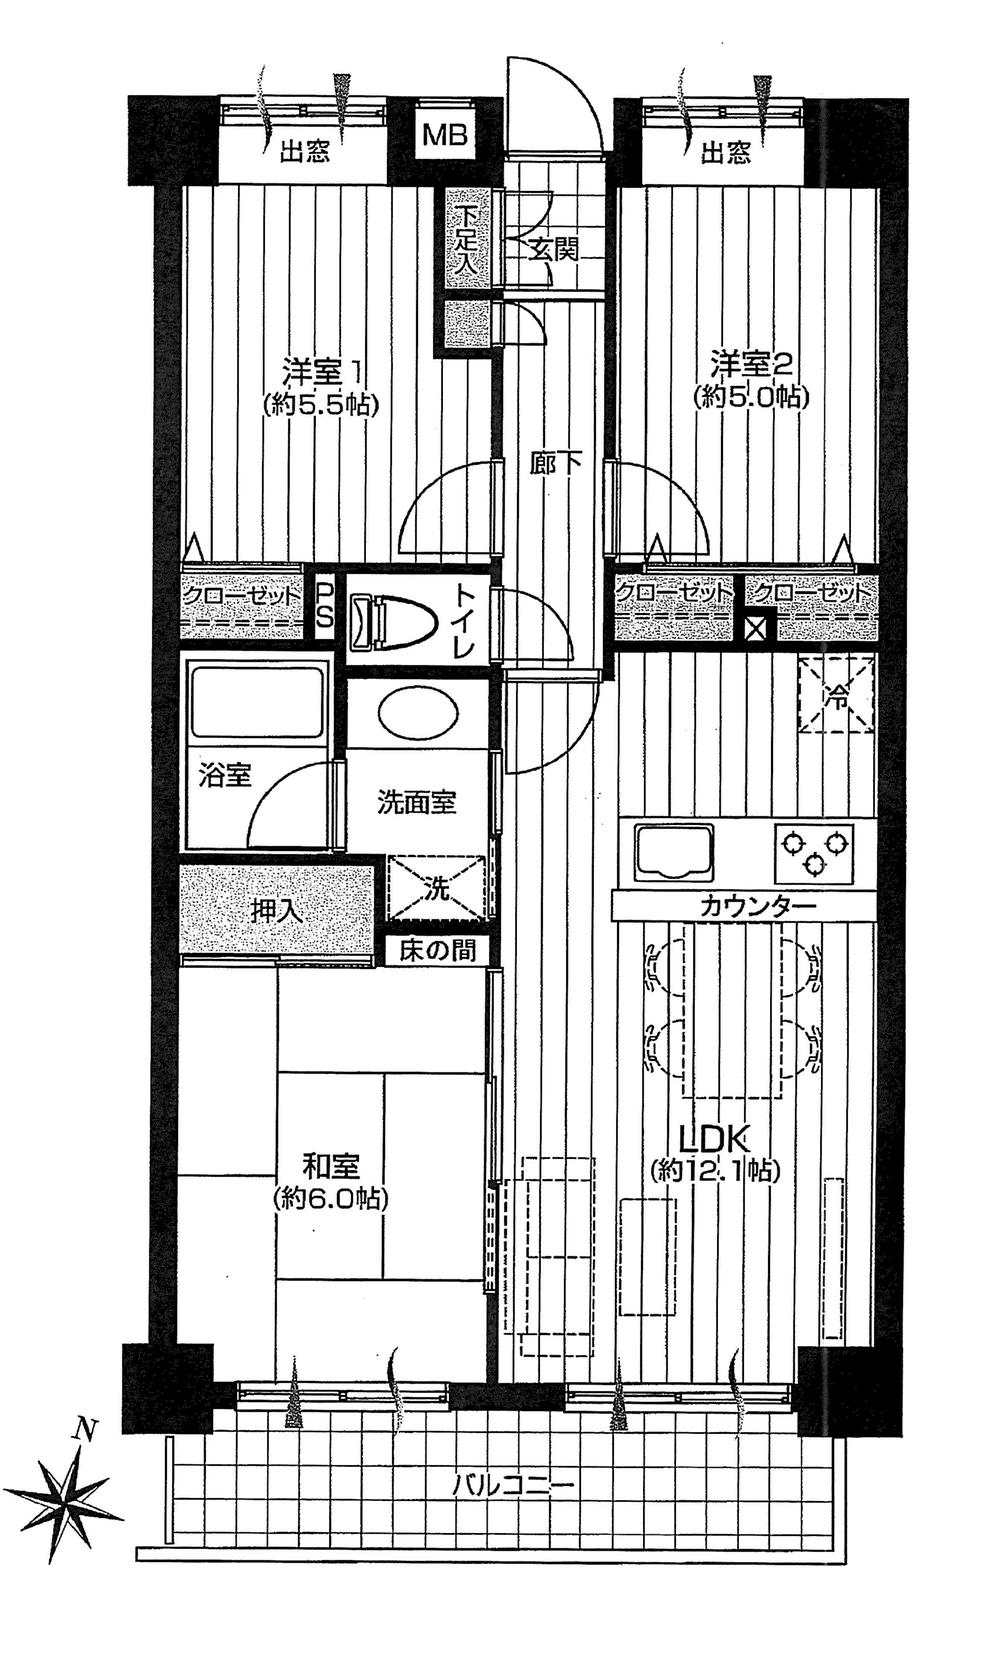 Floor plan. 3LDK, Price 19.9 million yen, Occupied area 60.32 sq m , Equipment and enhancement on the balcony area 7.7 sq m interior renovation! Face-to-face system kitchen water purifier visceral faucet ・ Bathroom Dryer ・ Shower toilet